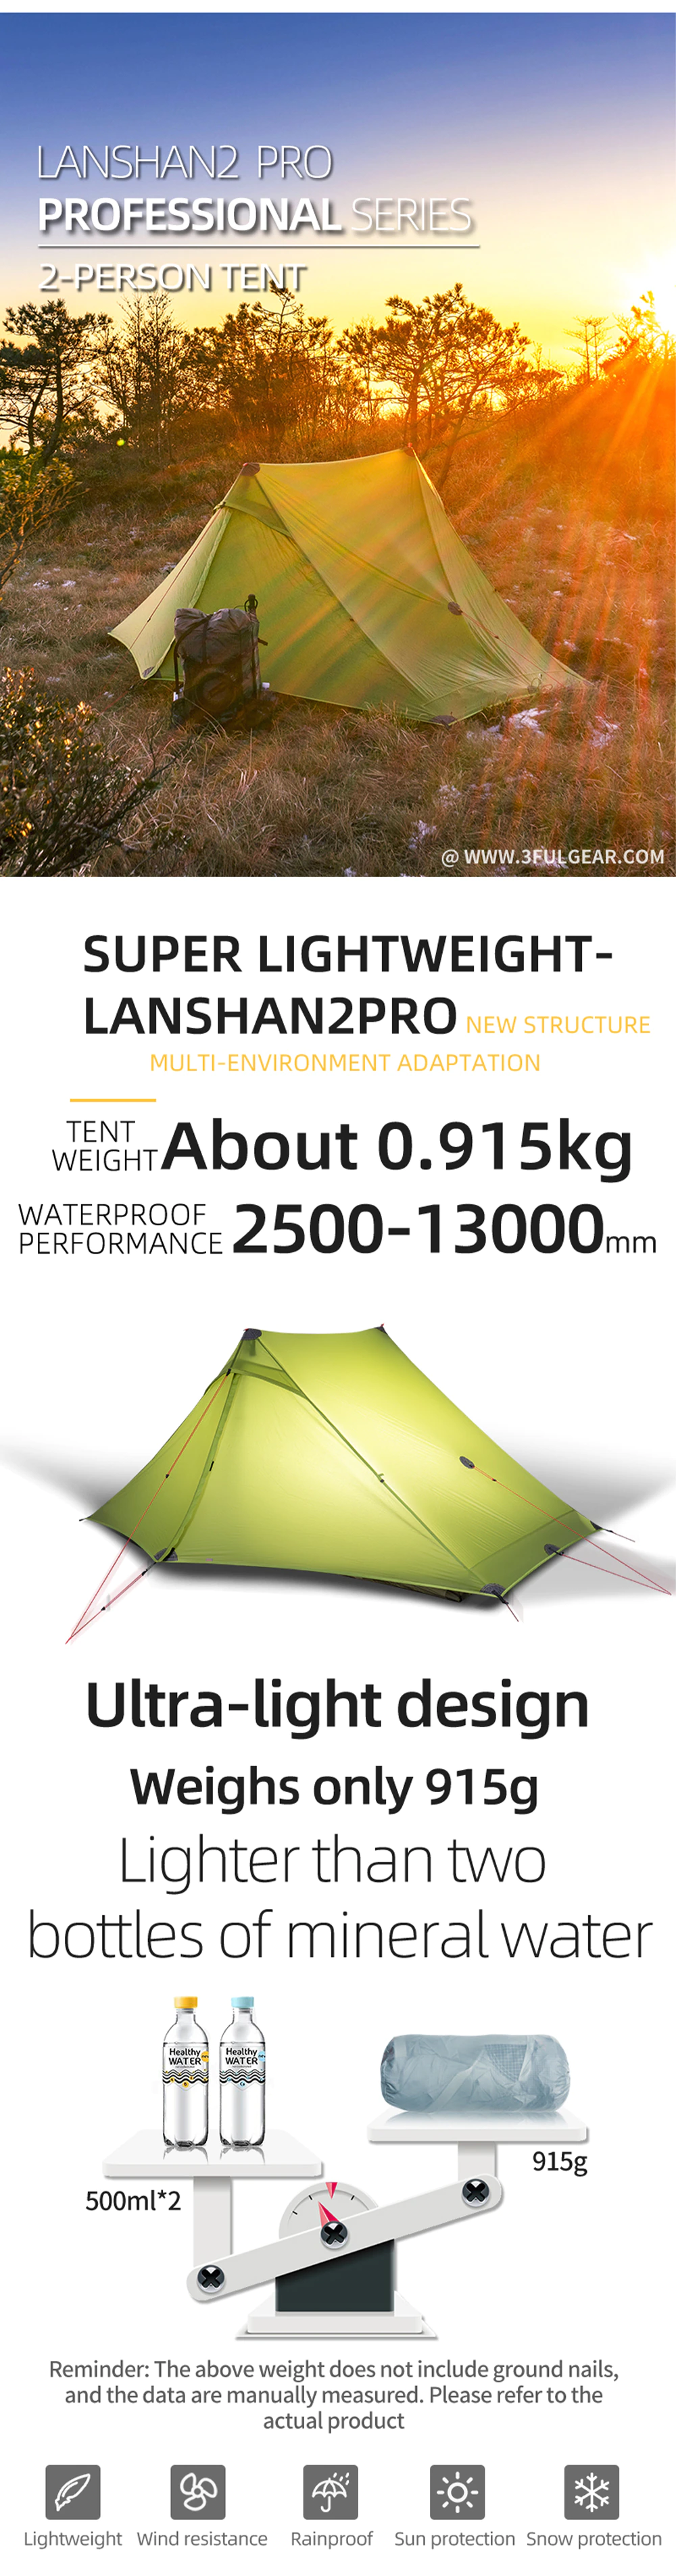 Cheap Goat Tents 3F UL GEAR LanShan 2 pro Tent 2 Person Outdoor Ultralight Camping Tent 3 Season Professional 20D Nylon Both Sides Silicon Tent Tents 